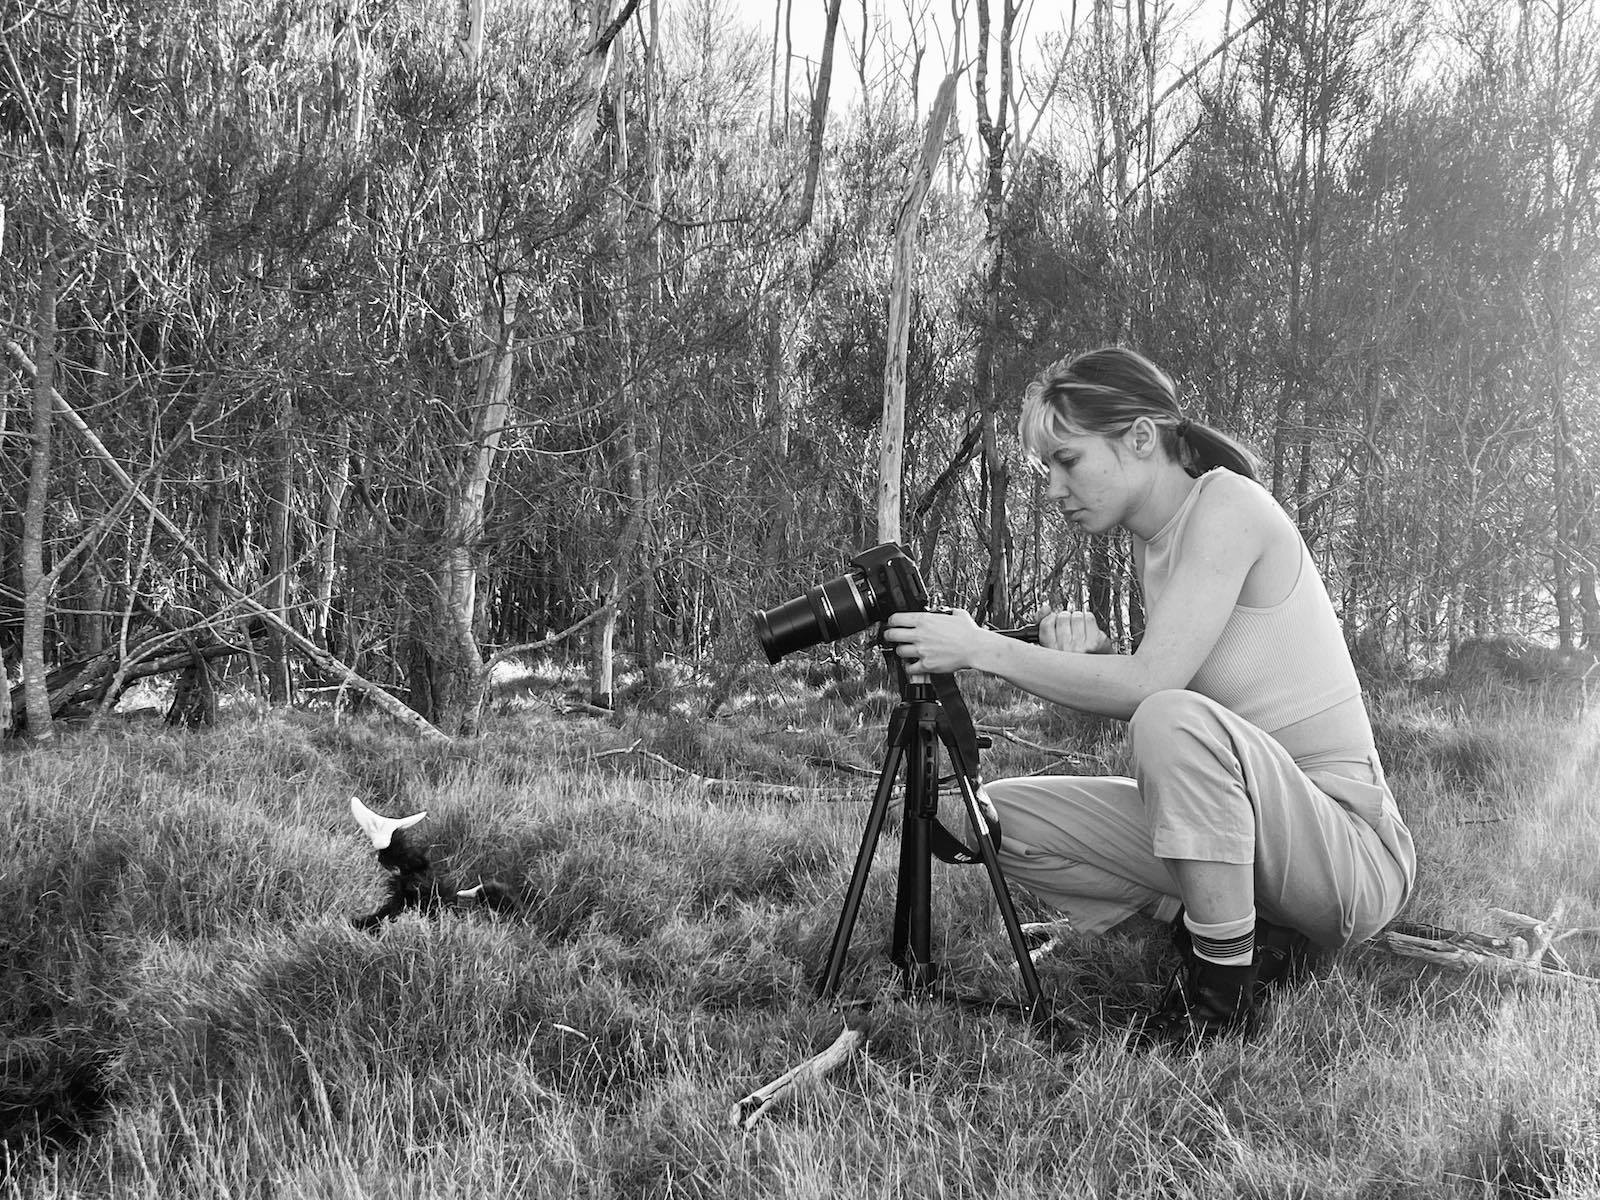 A black and white photograph captures a young person in the landscape photographing a small object